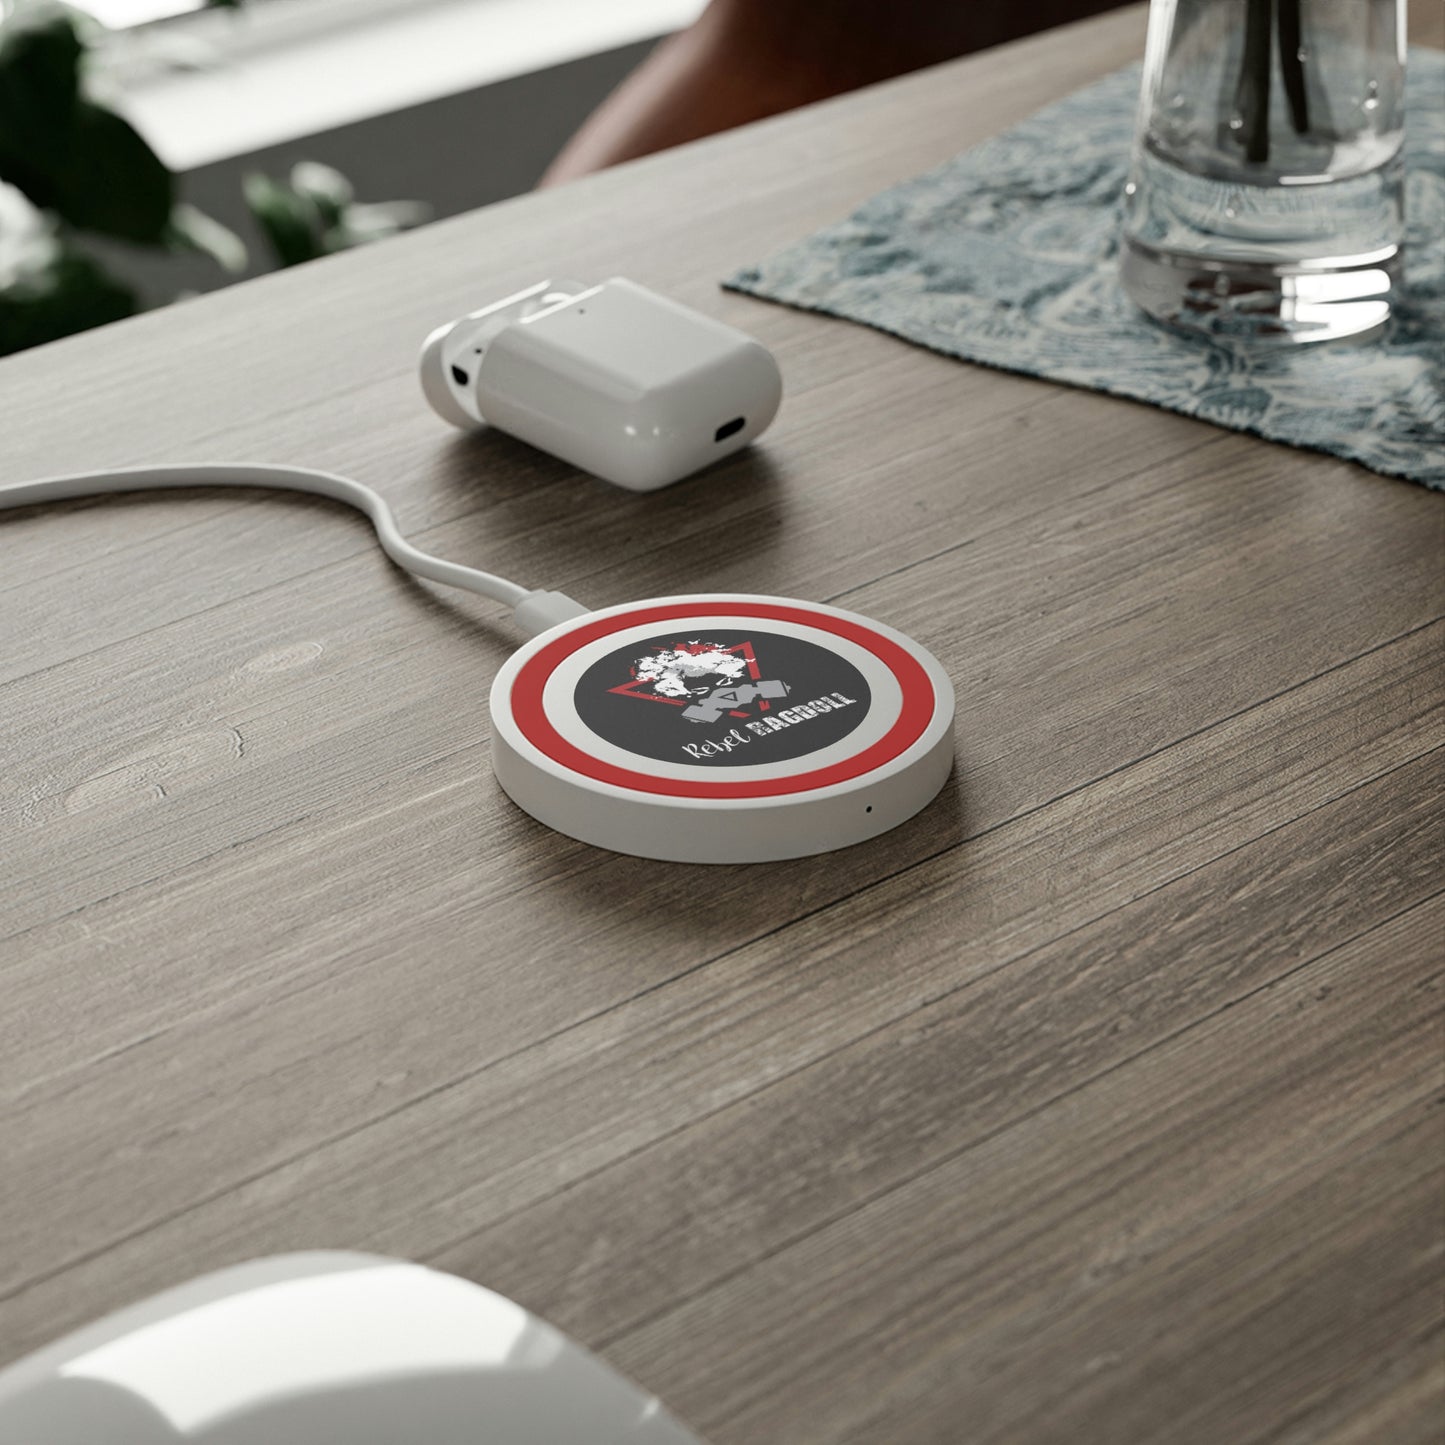 Afro Dystopia Quake Wireless Charging Pad